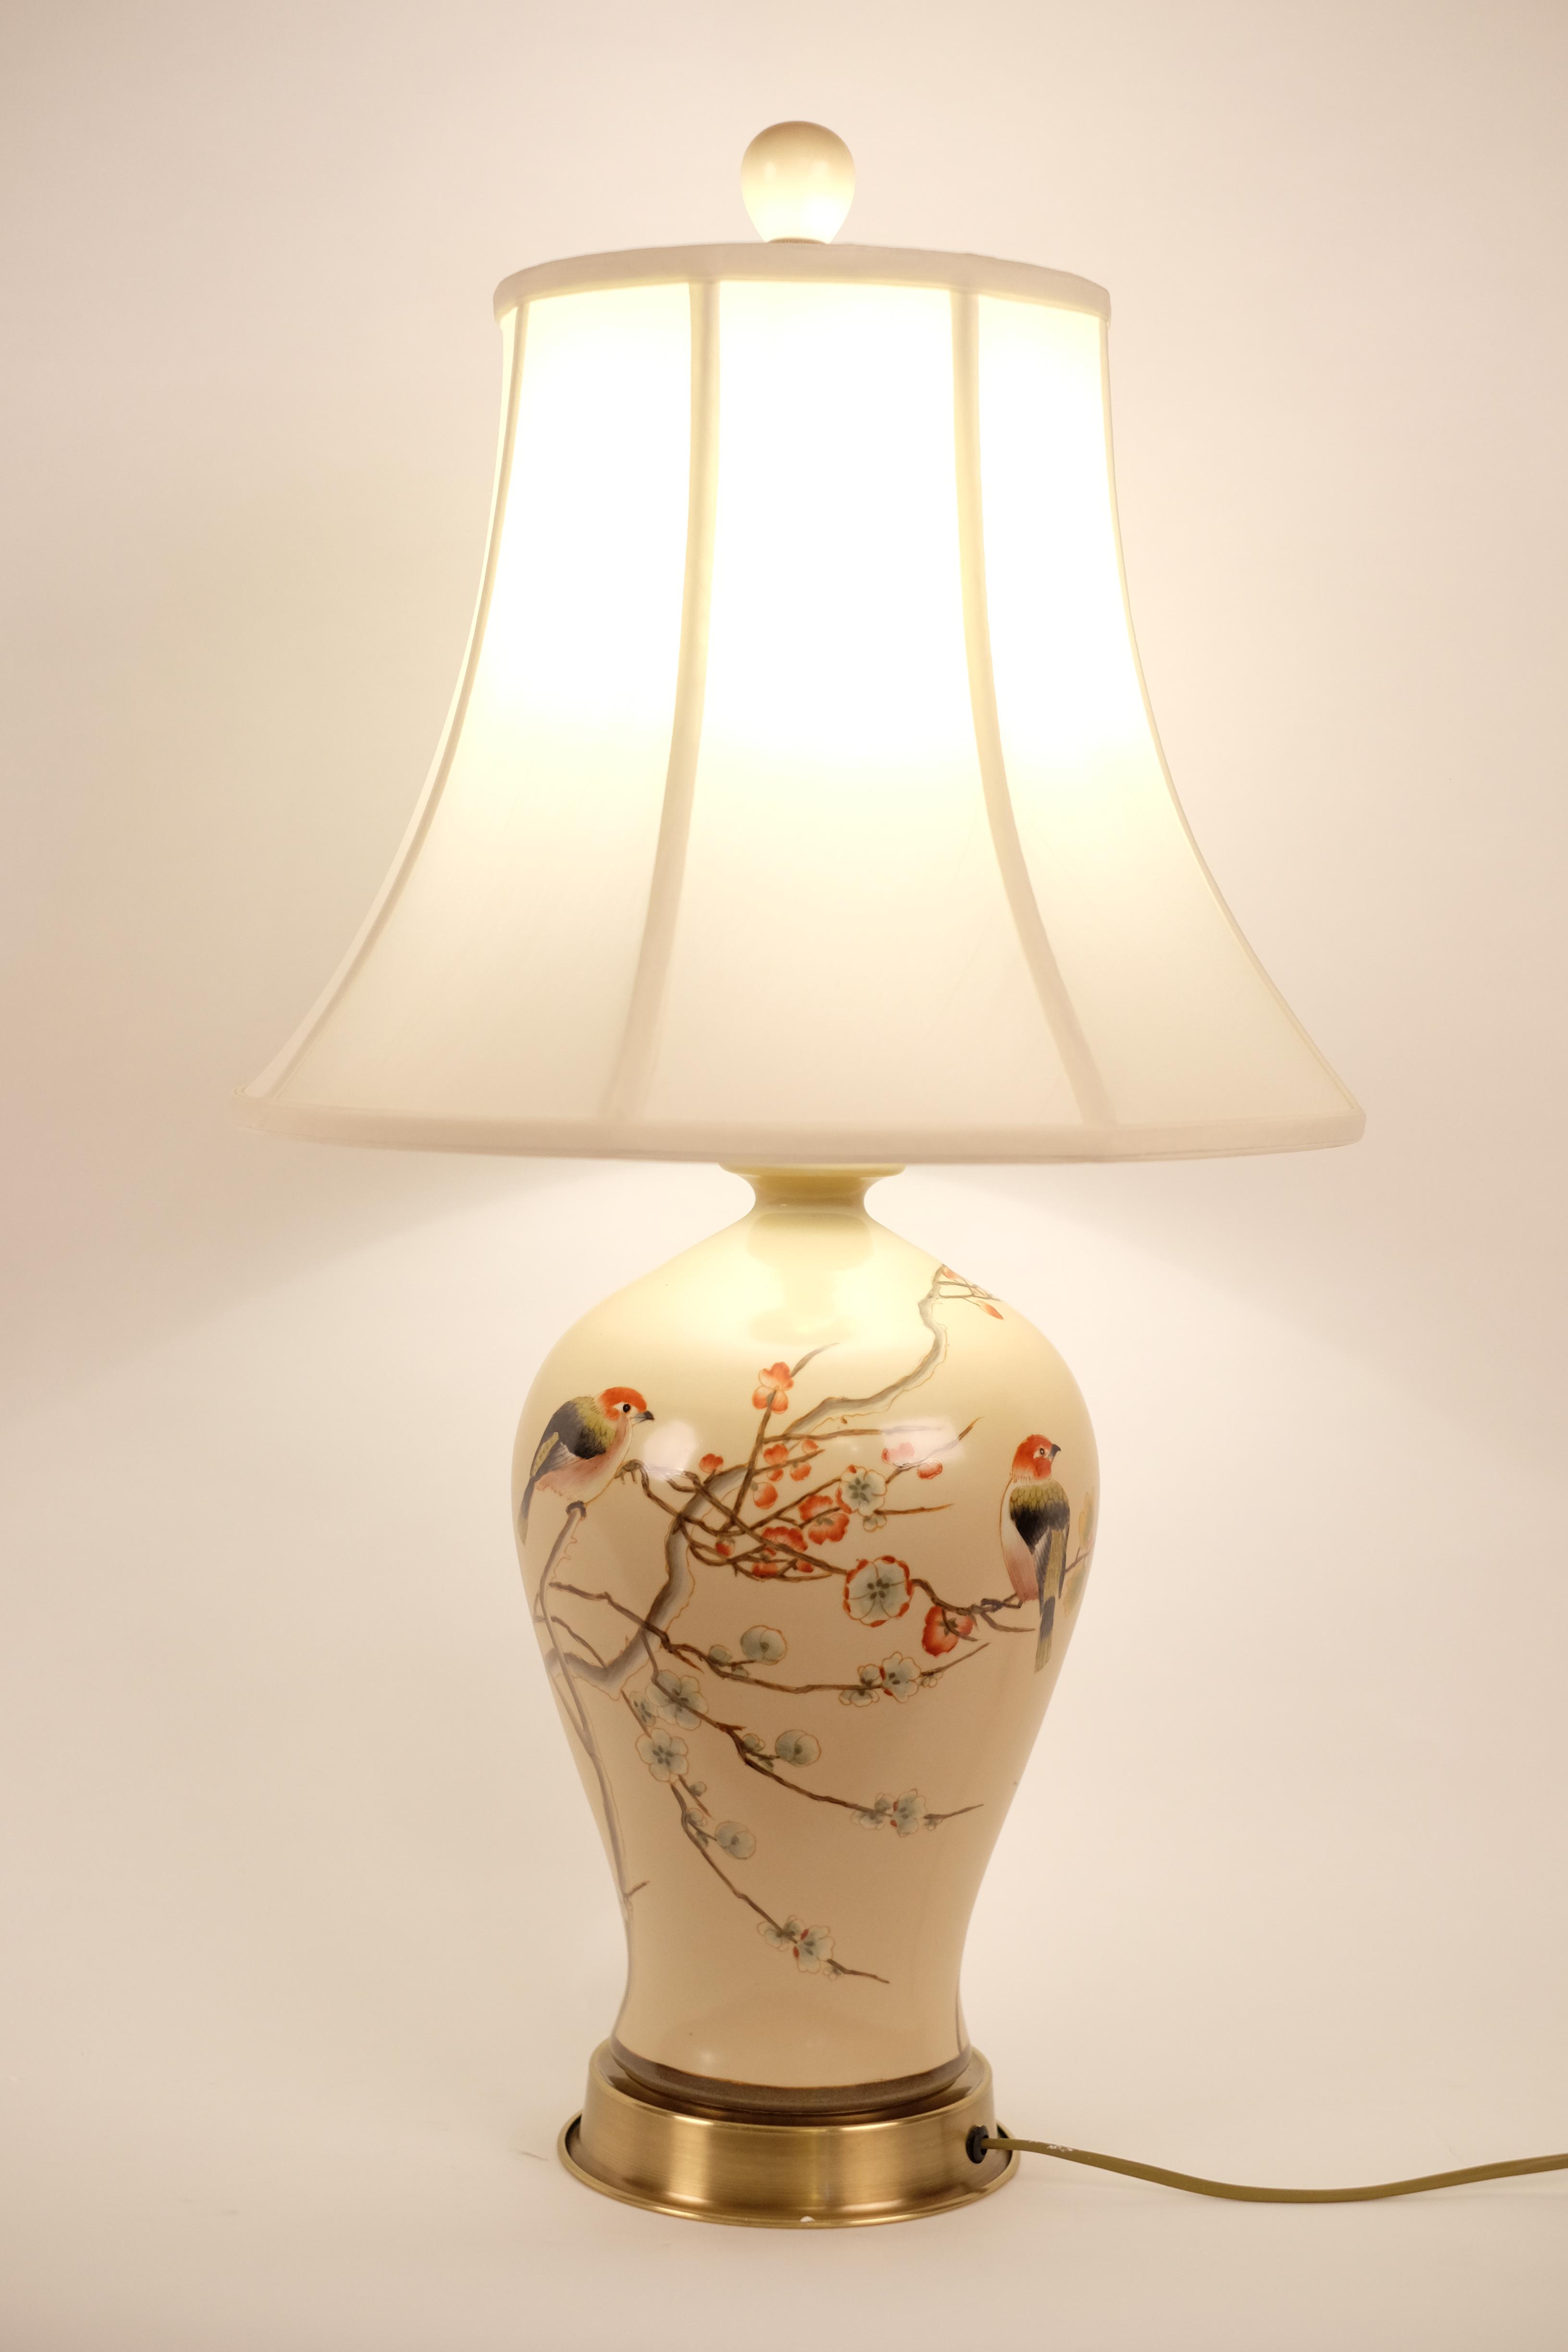 Chinese Porcelain Table Lamp Handpainted Cream - Fine Asian Lamps